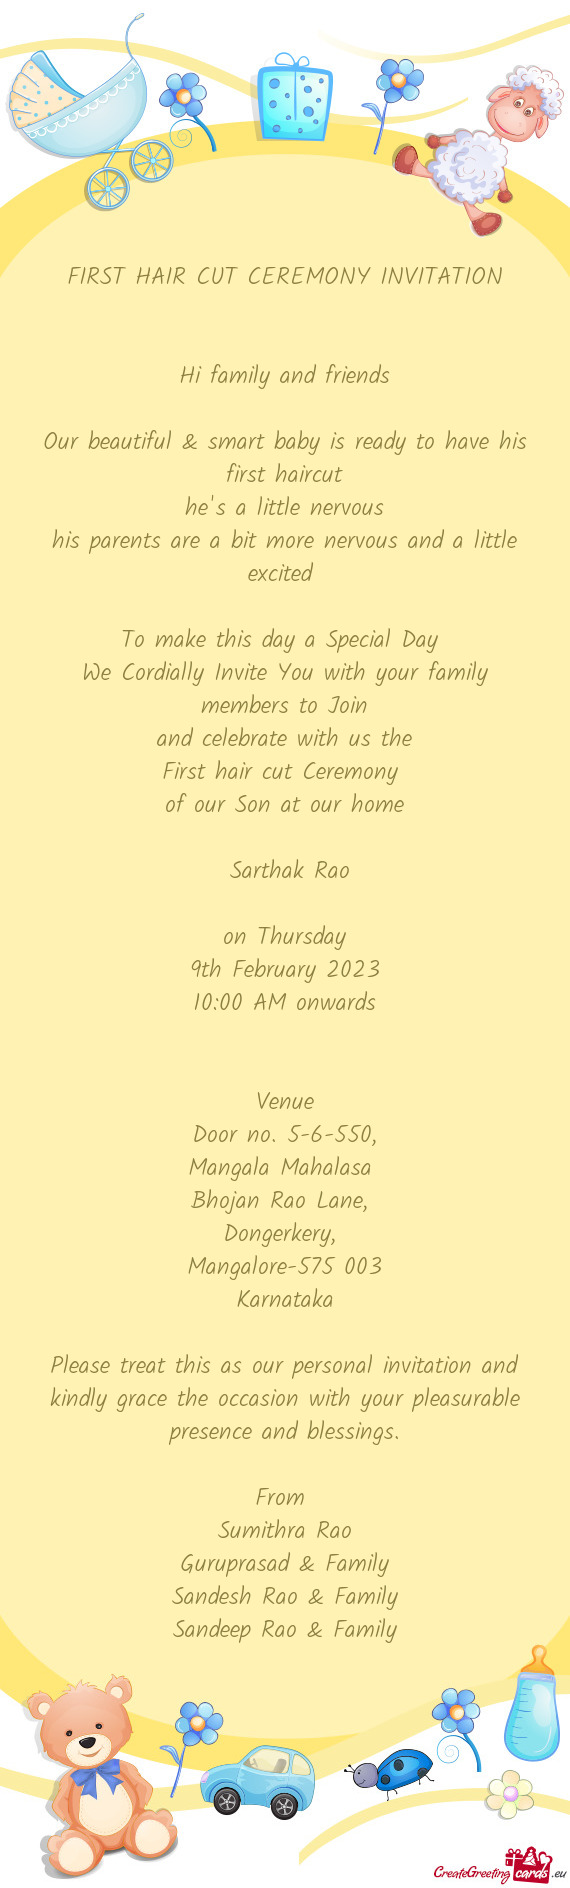 We Cordially Invite You with your family members to Join